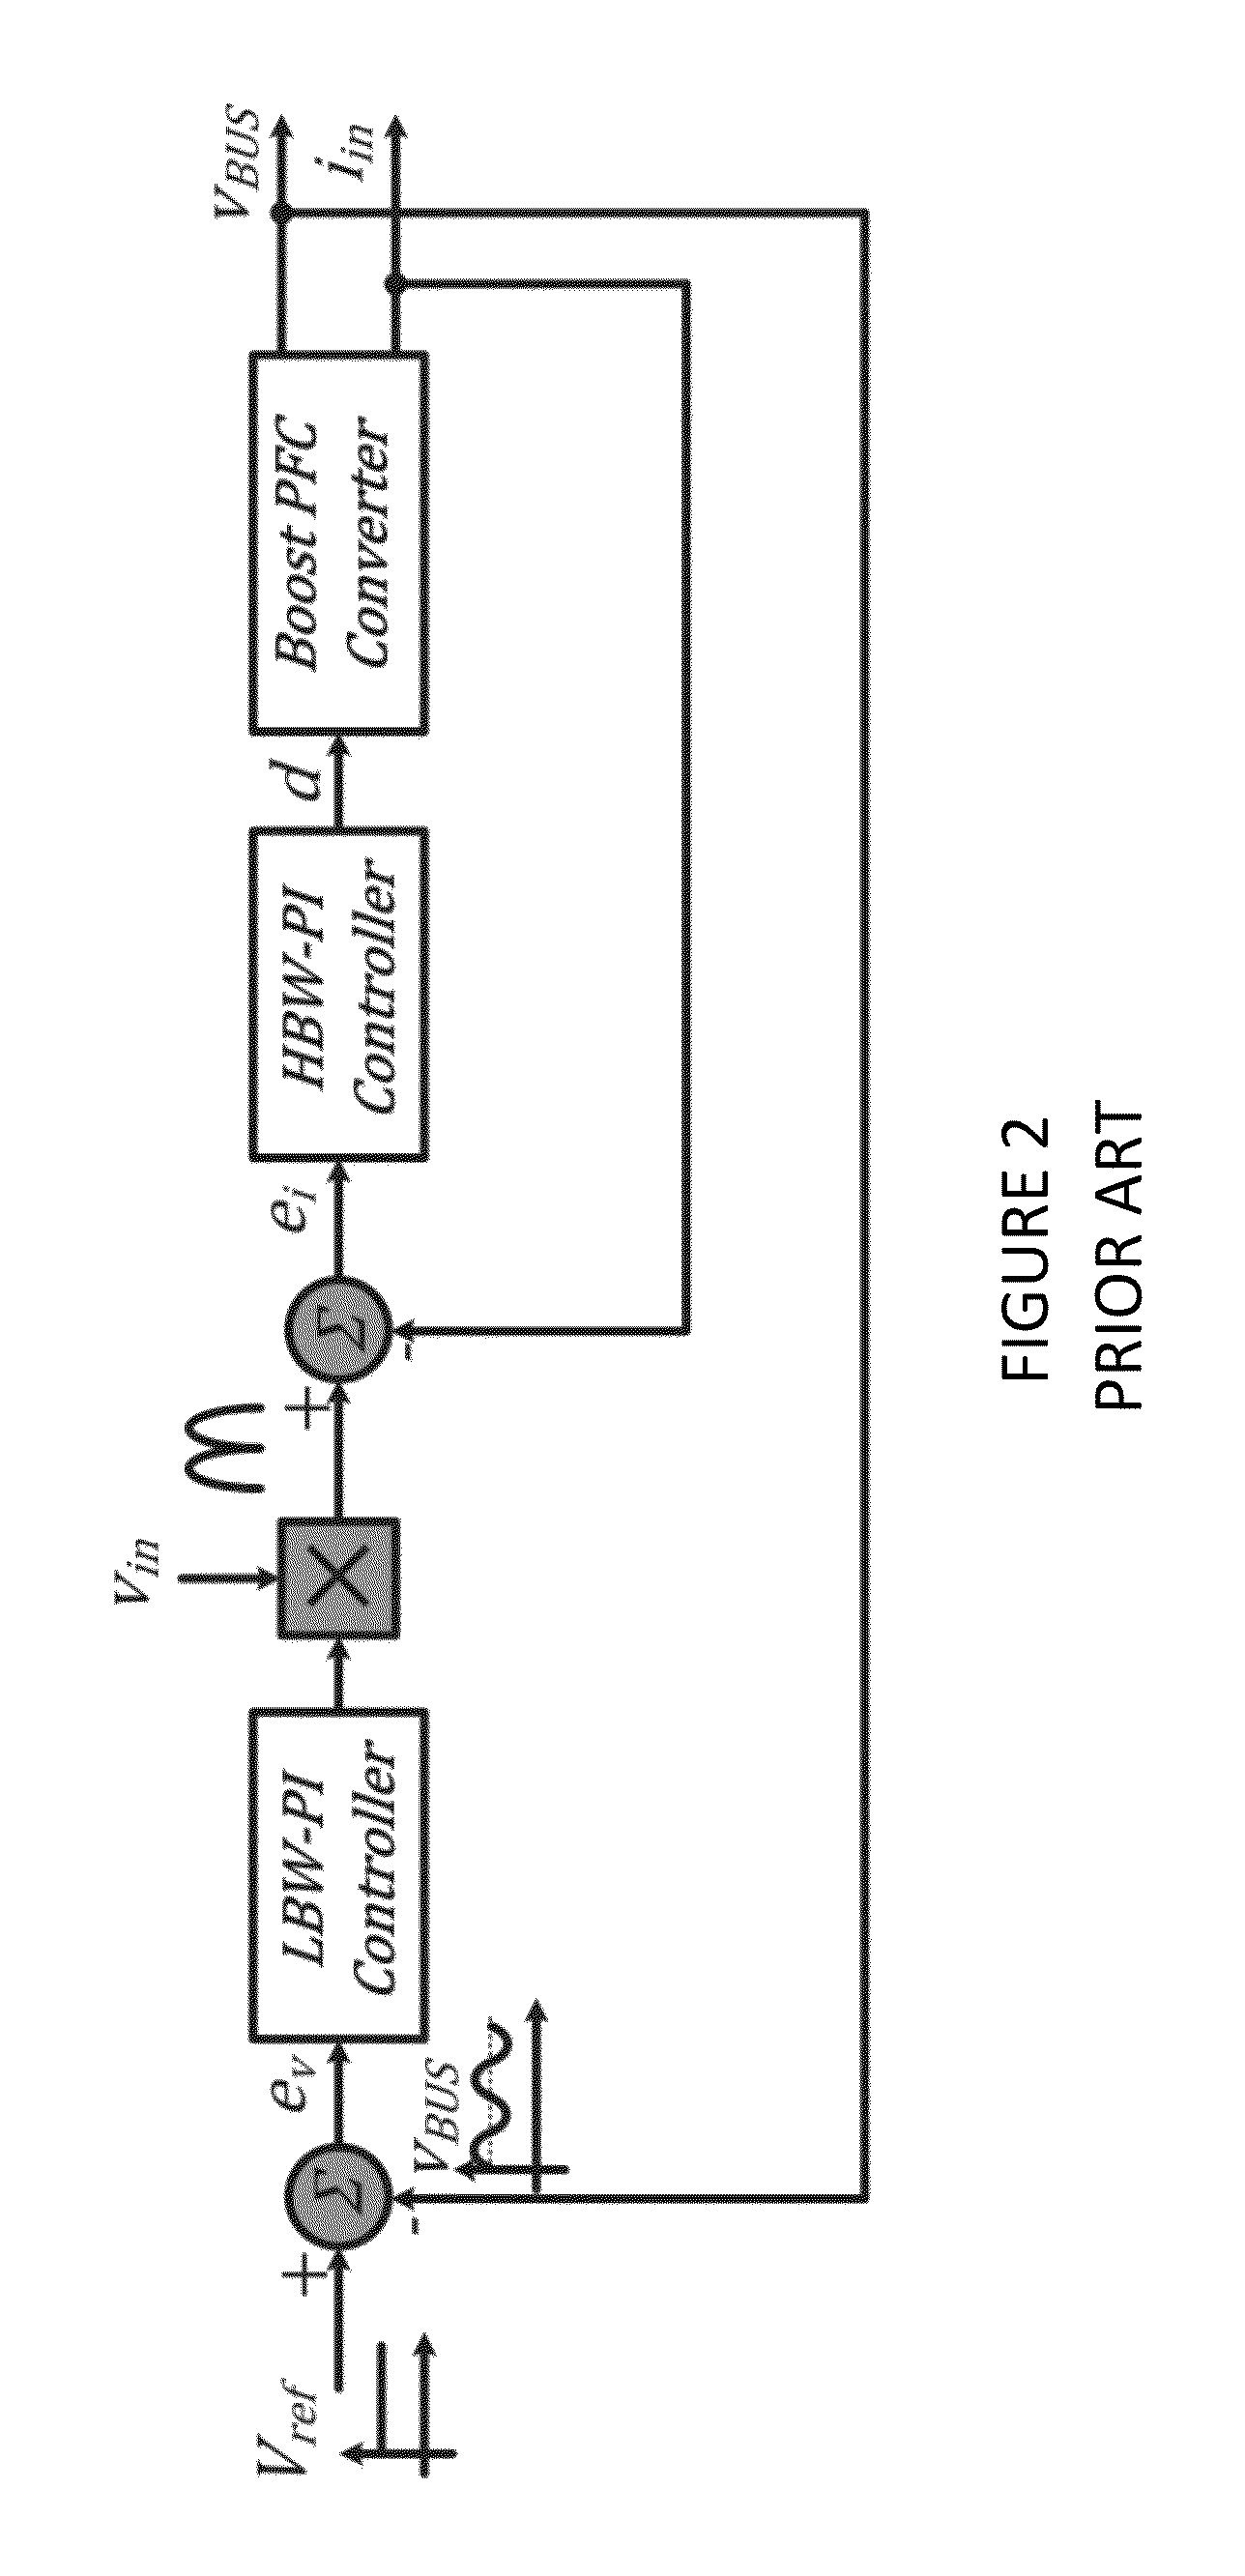 Adaptive nonlinear current observer for boost PFC AC/DC converters